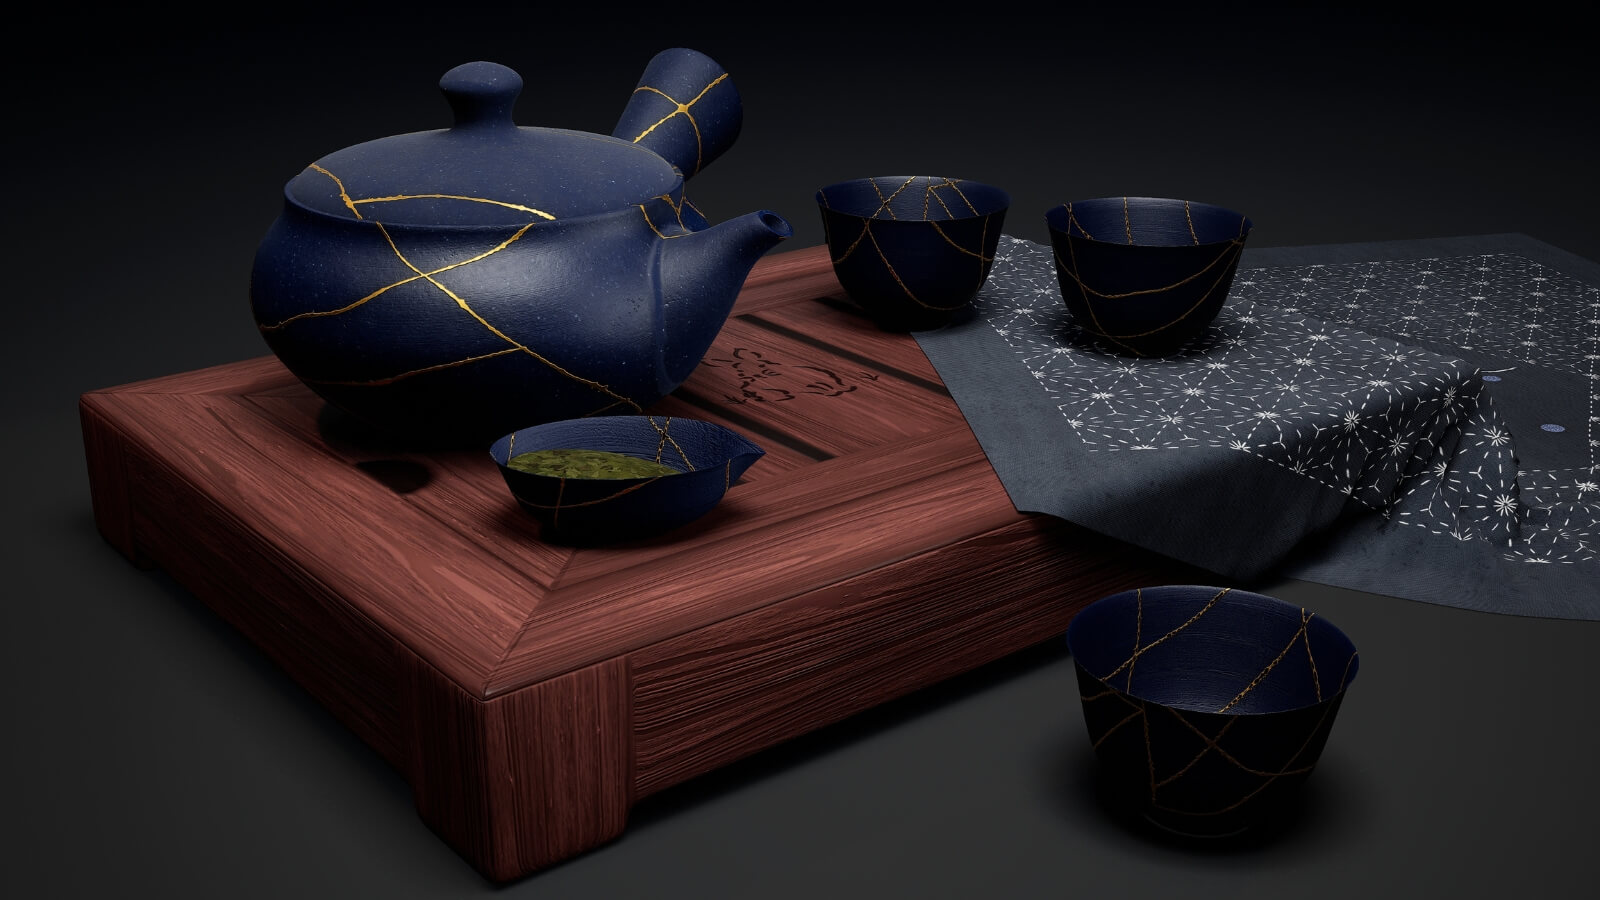 A side view of a blue and gold pottery set.